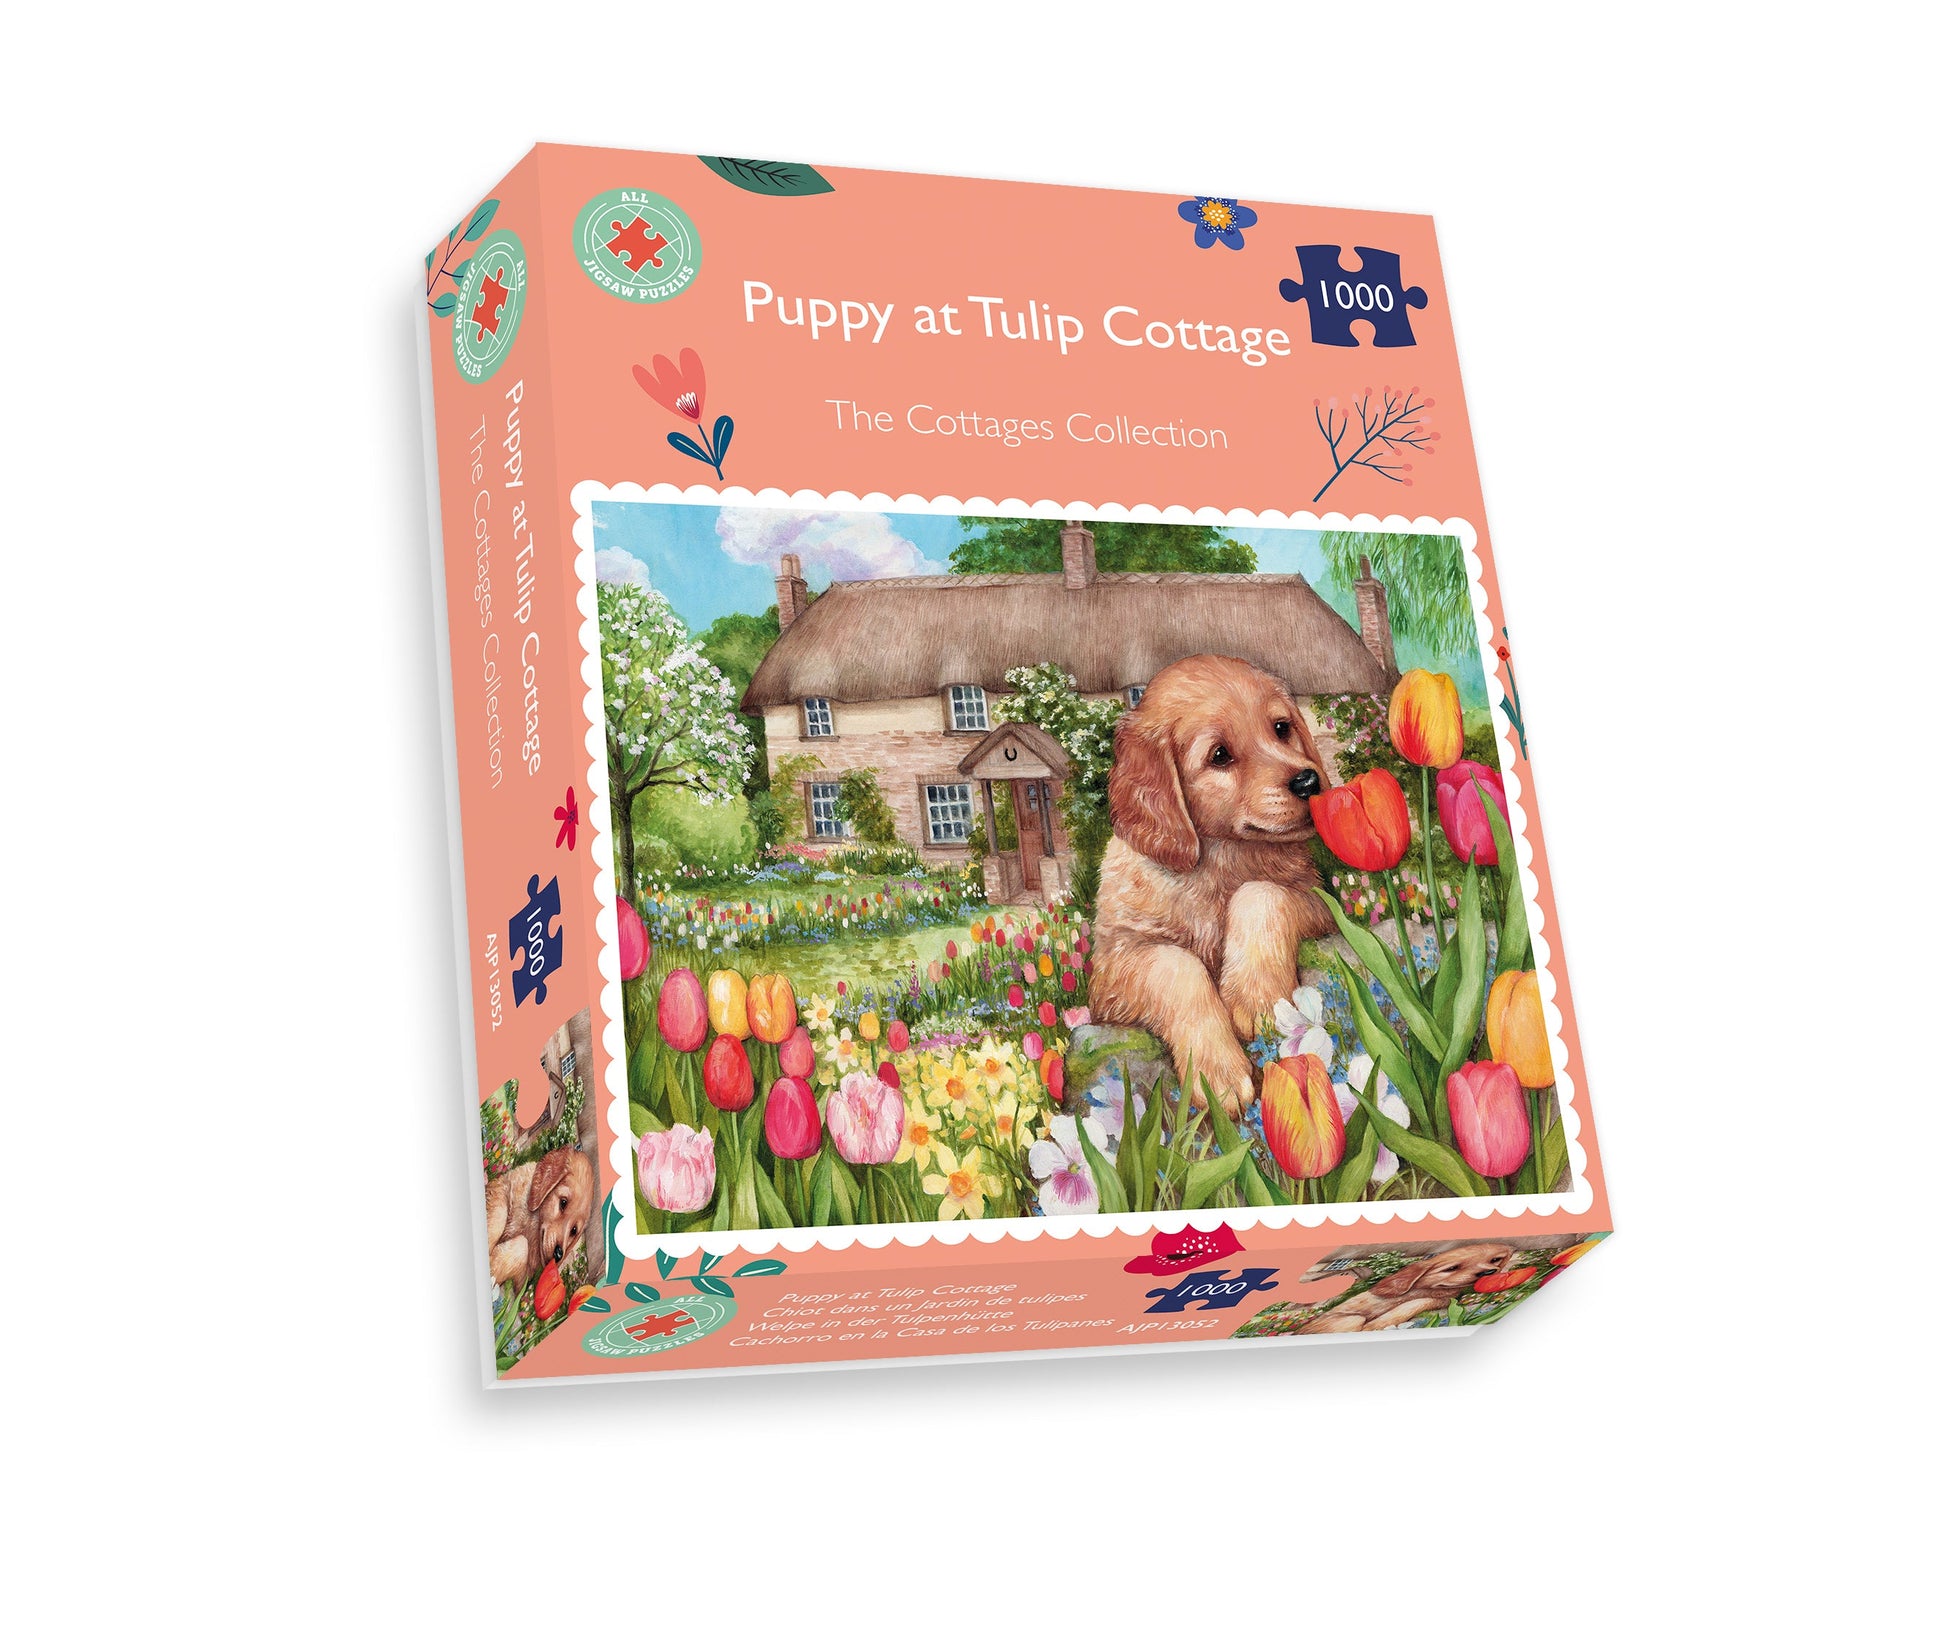 All Jigsaw Puzzles Puppy at Tulip Cottage - Debbie Cook Jigsaw Puzzle (500 Pieces)